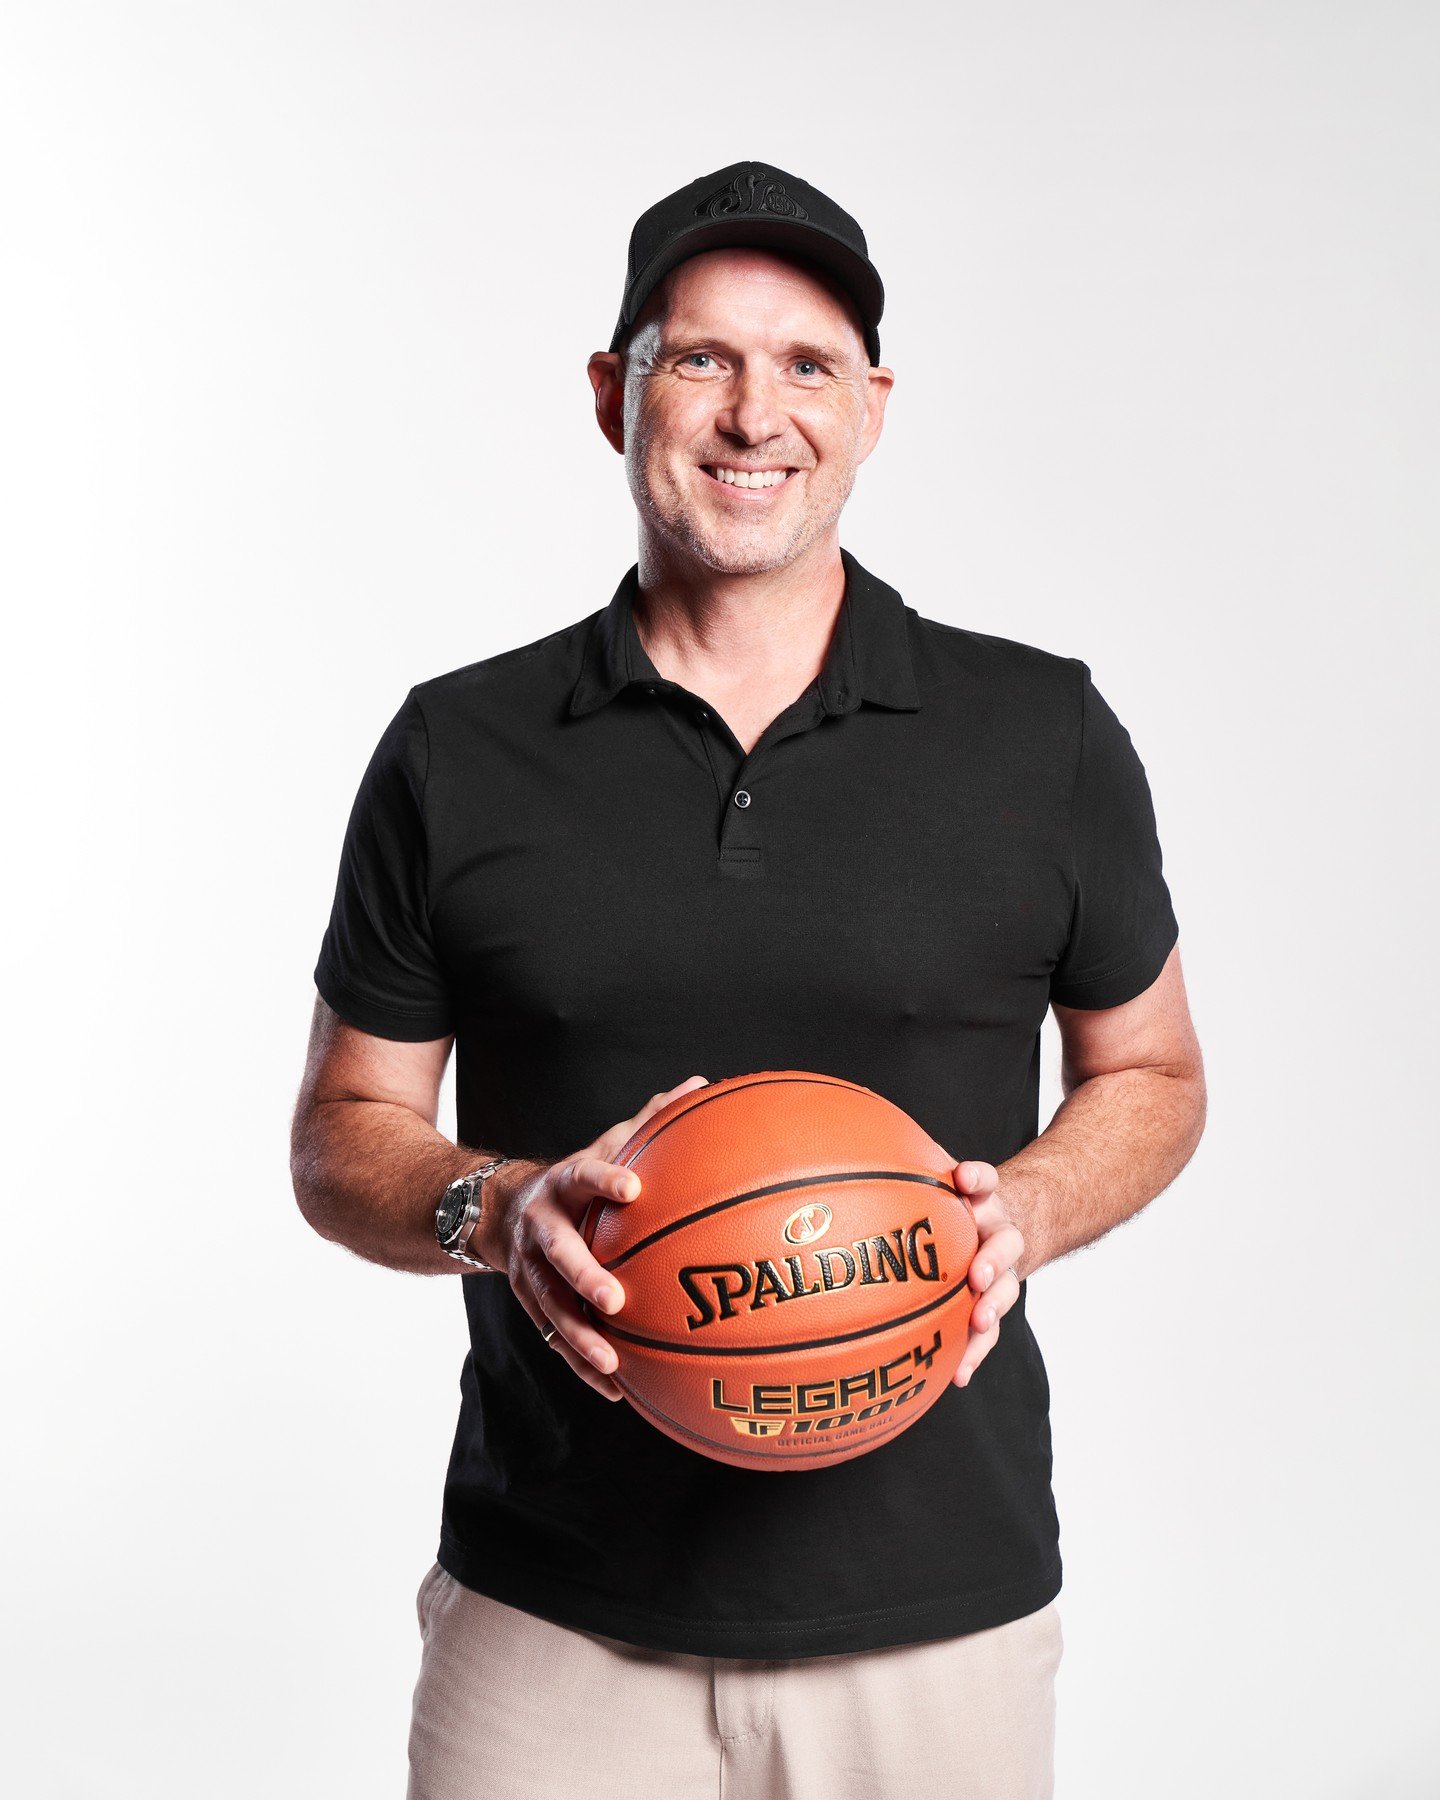 NEW CEO ANNOUNCEMENT 

The Northern Suburbs Basketball Association (NSBA) is pleased to announce the appointment of Eric Stephens as its new Chief Executive Officer, effective June 3, 2024.

Eric brings over 20 years of senior leadership and CEO expe